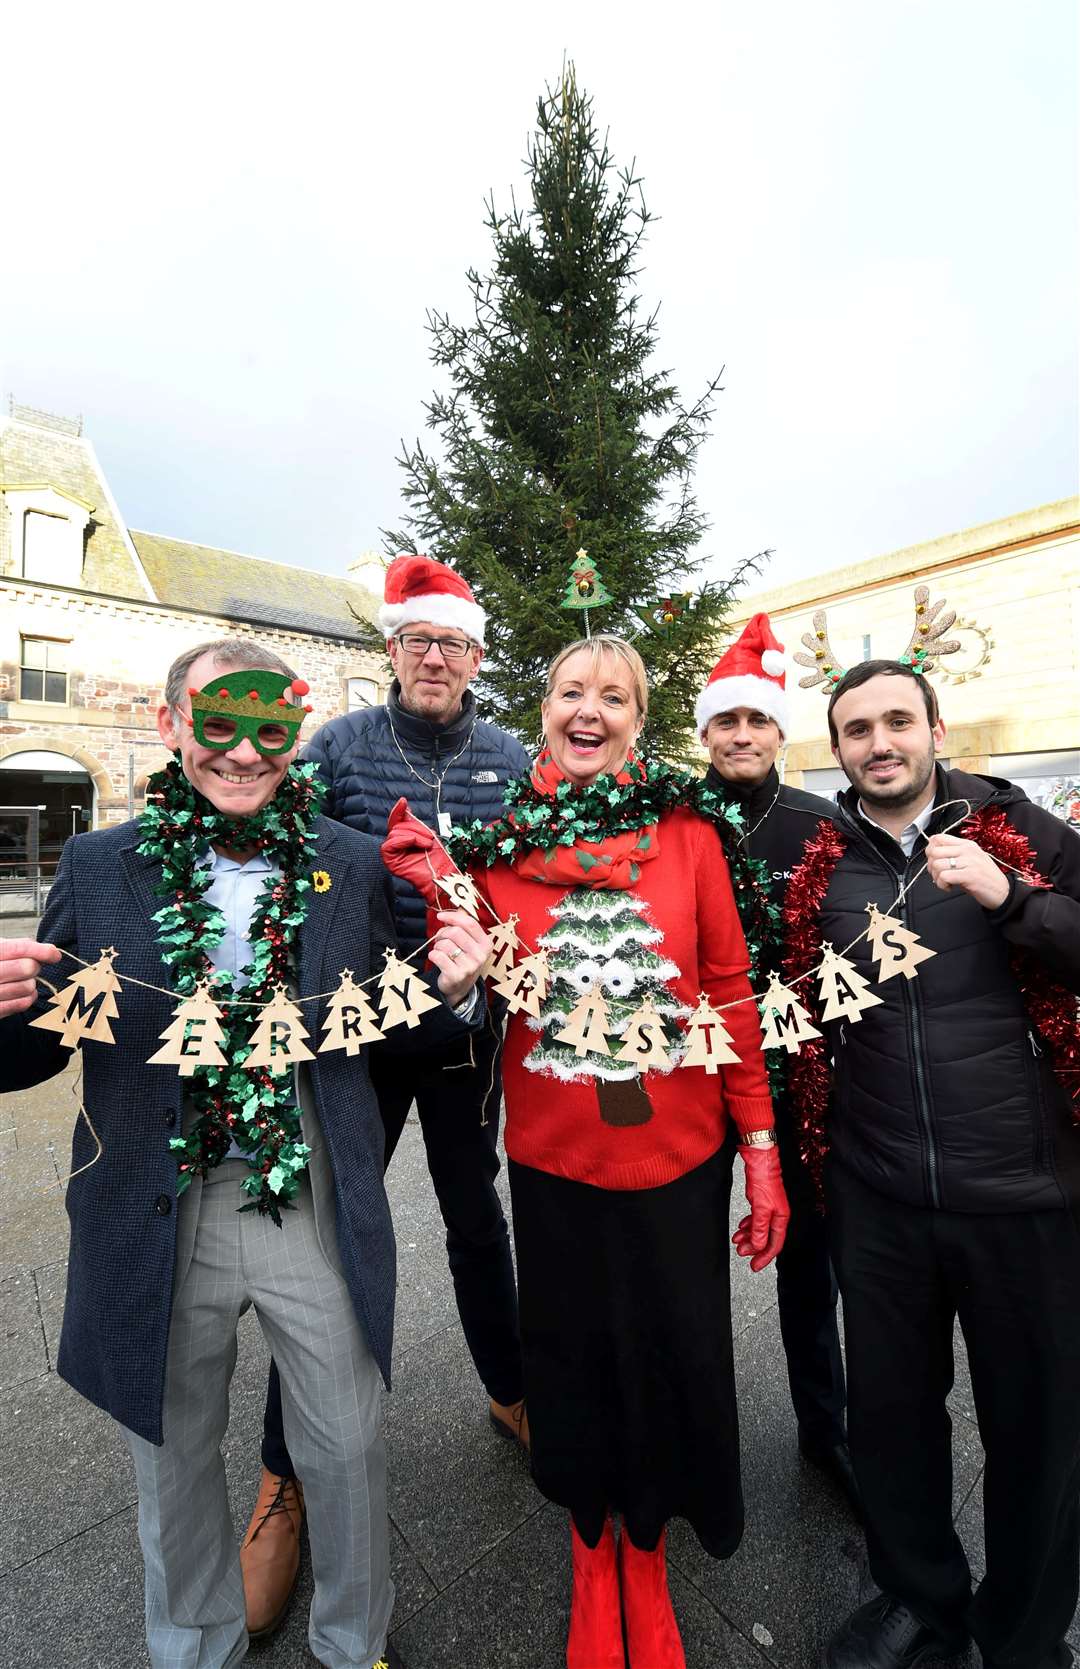 Andrew Leaver of Highland Hospice with Dougal Murray of WGC Scotland, Eastgate Shopping Centre manager Jackie Cuddy and Steven Mitchell and Gavin Gray of Keyline with the Falcon Square tree.